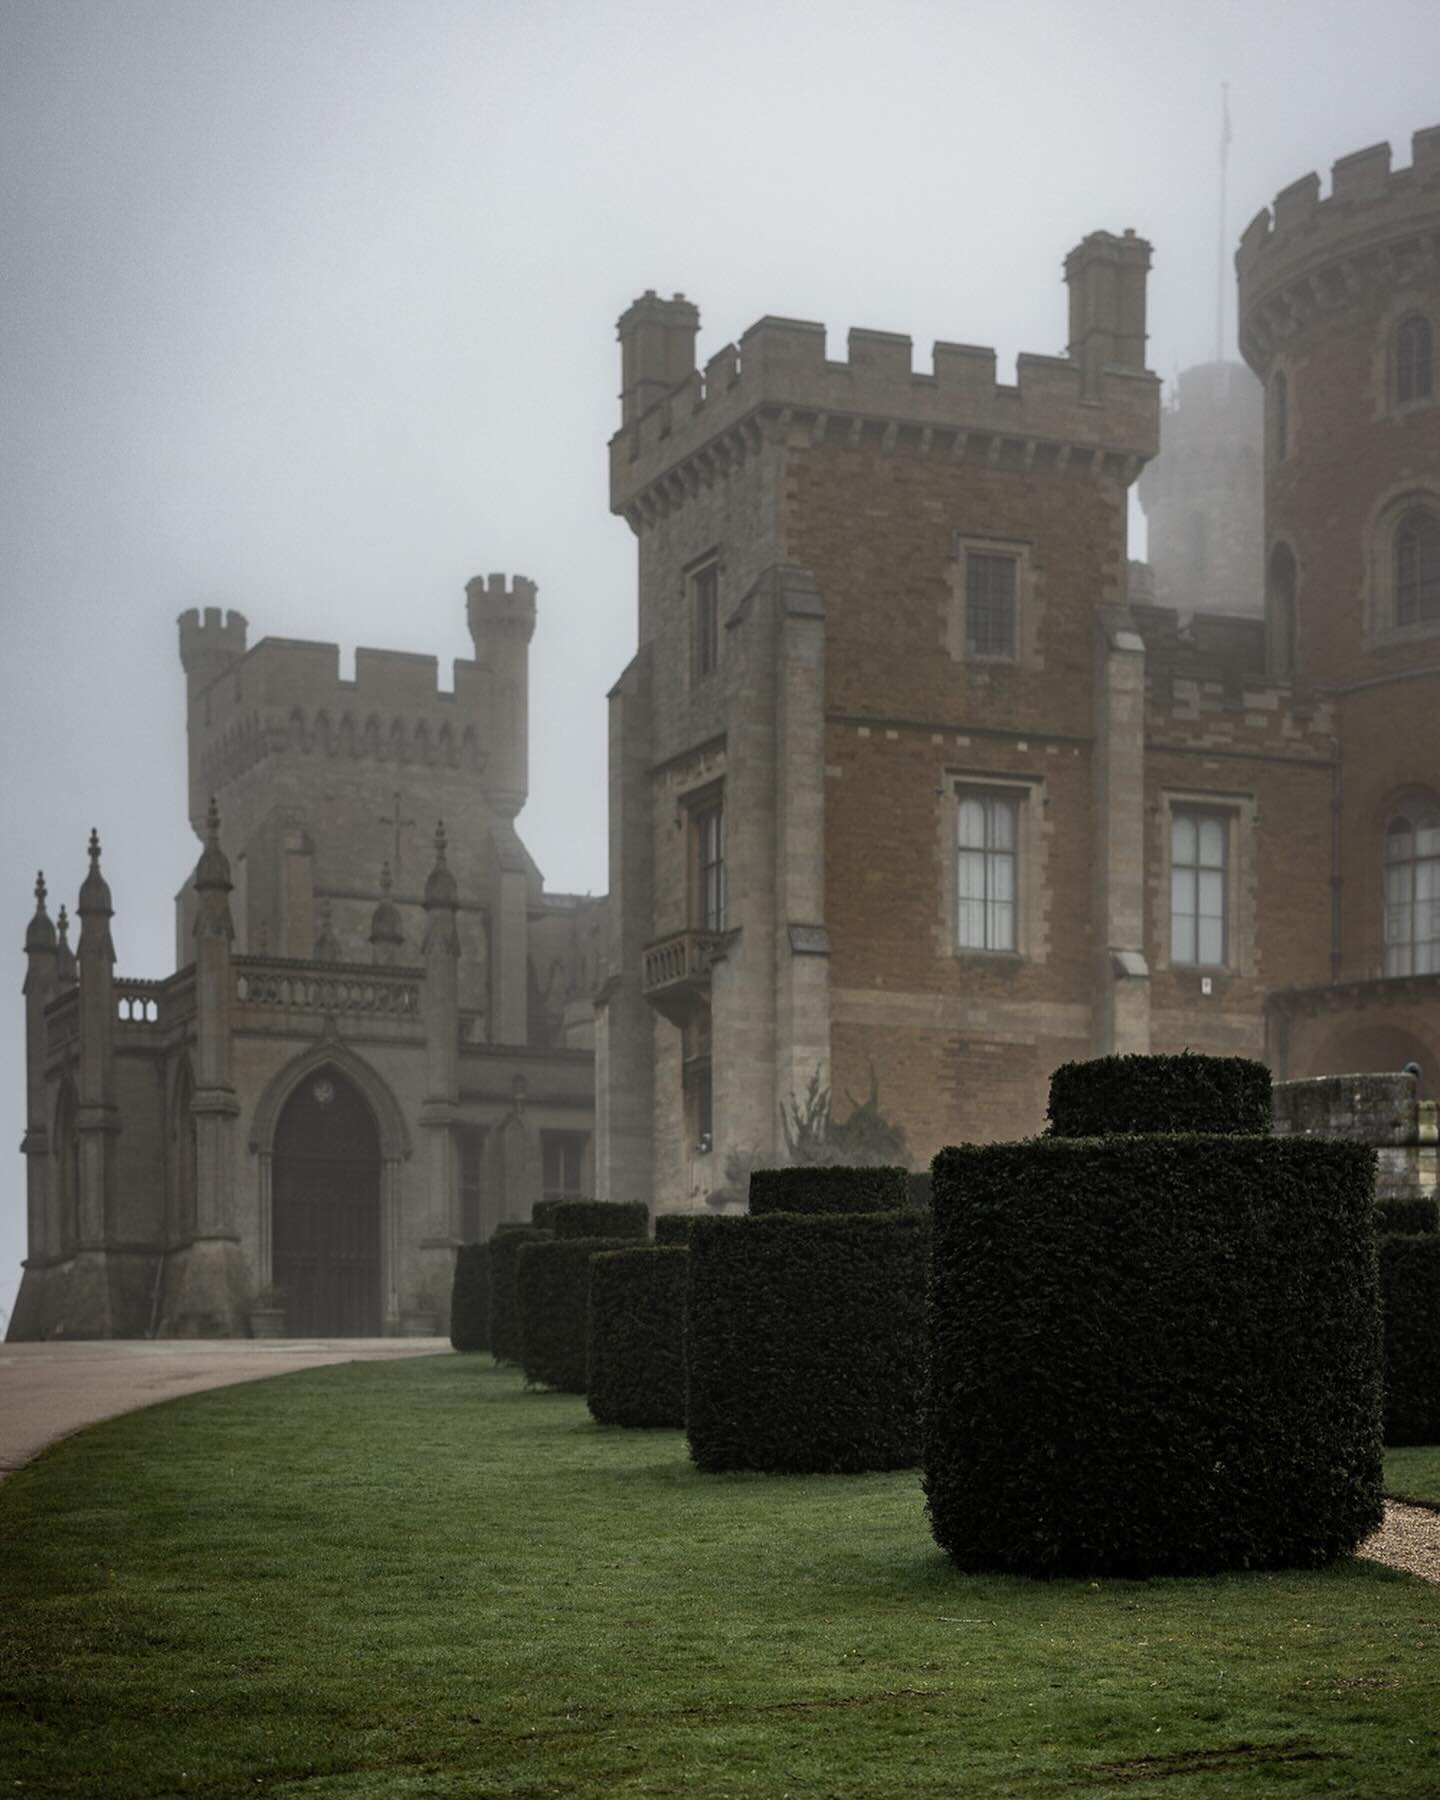 On a misty Sunday morning we managed to visit @belvoircastle I was looking forward to taking in the wonderful landscape designed by Capability Brown but the weather had other plans! 😂 
The camellias did not disappoint though and our daughter loved t